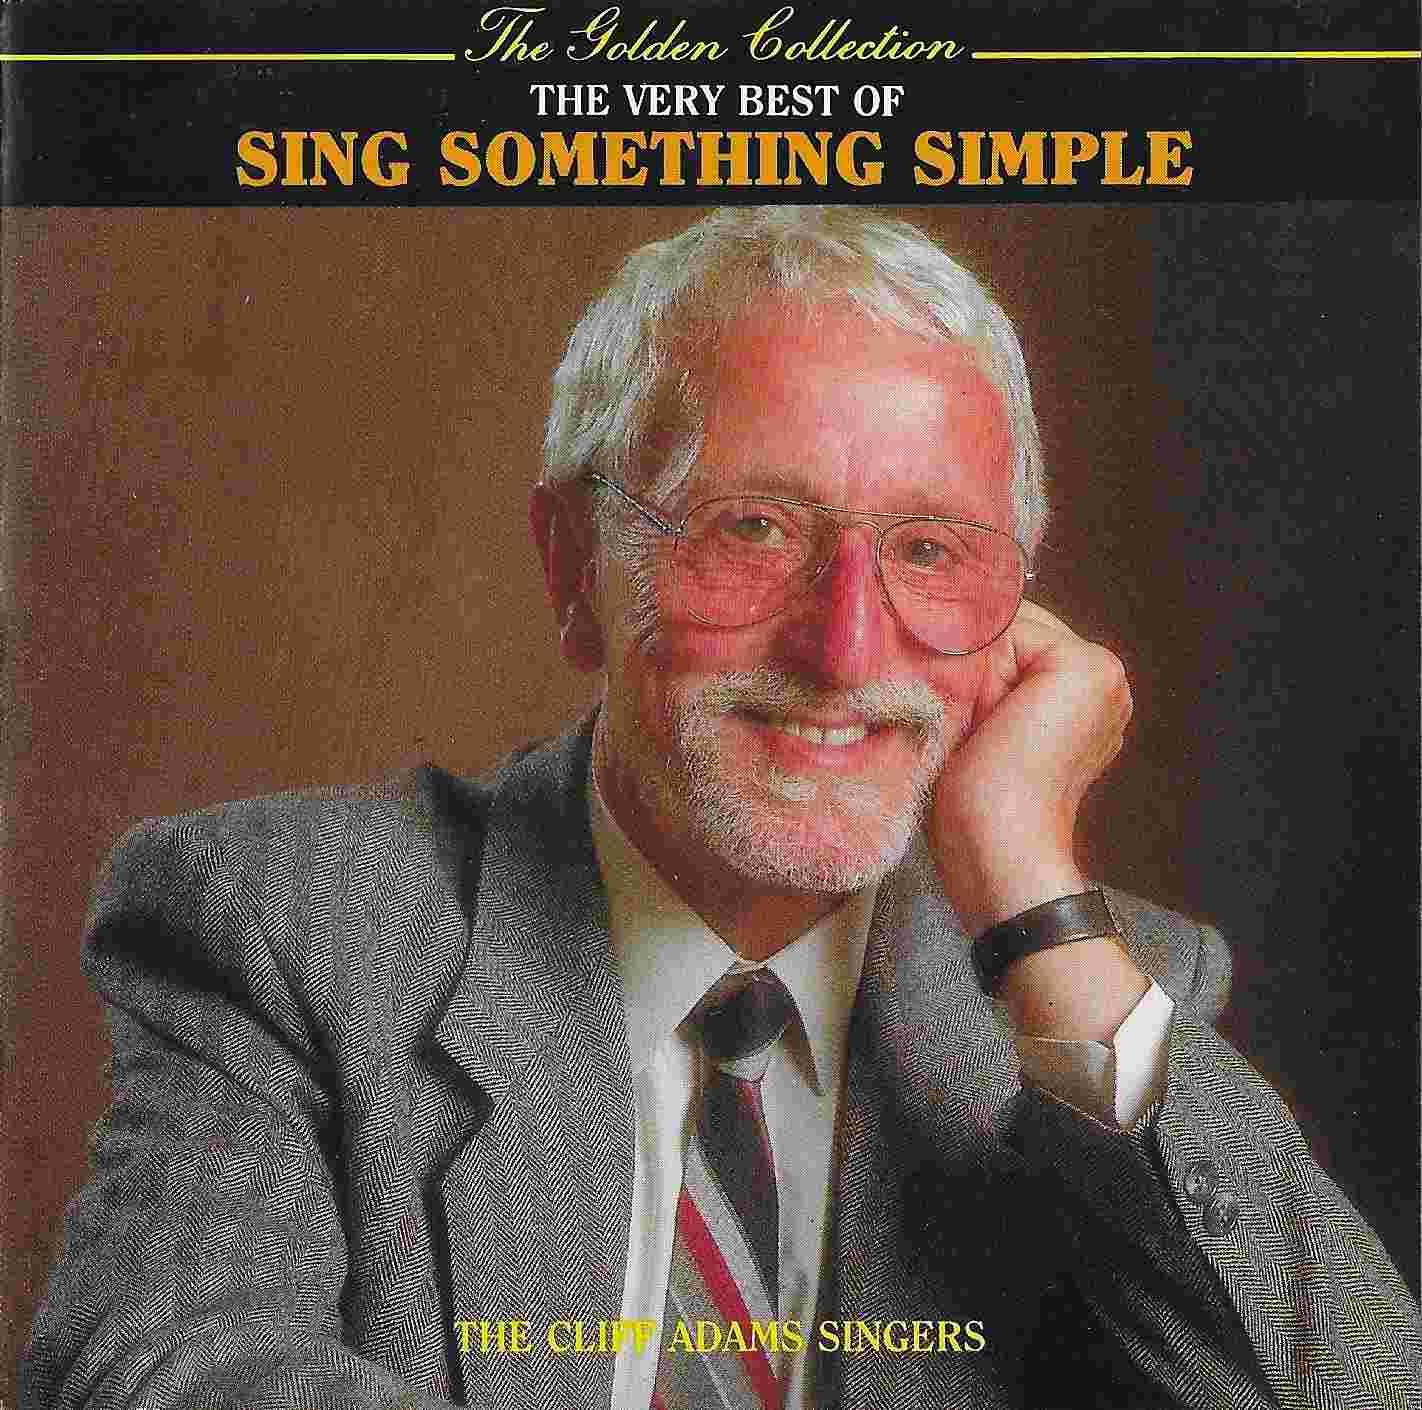 Picture of PWKS 656 The very best of Sing Something Simple by artist Various from the BBC cds - Records and Tapes library